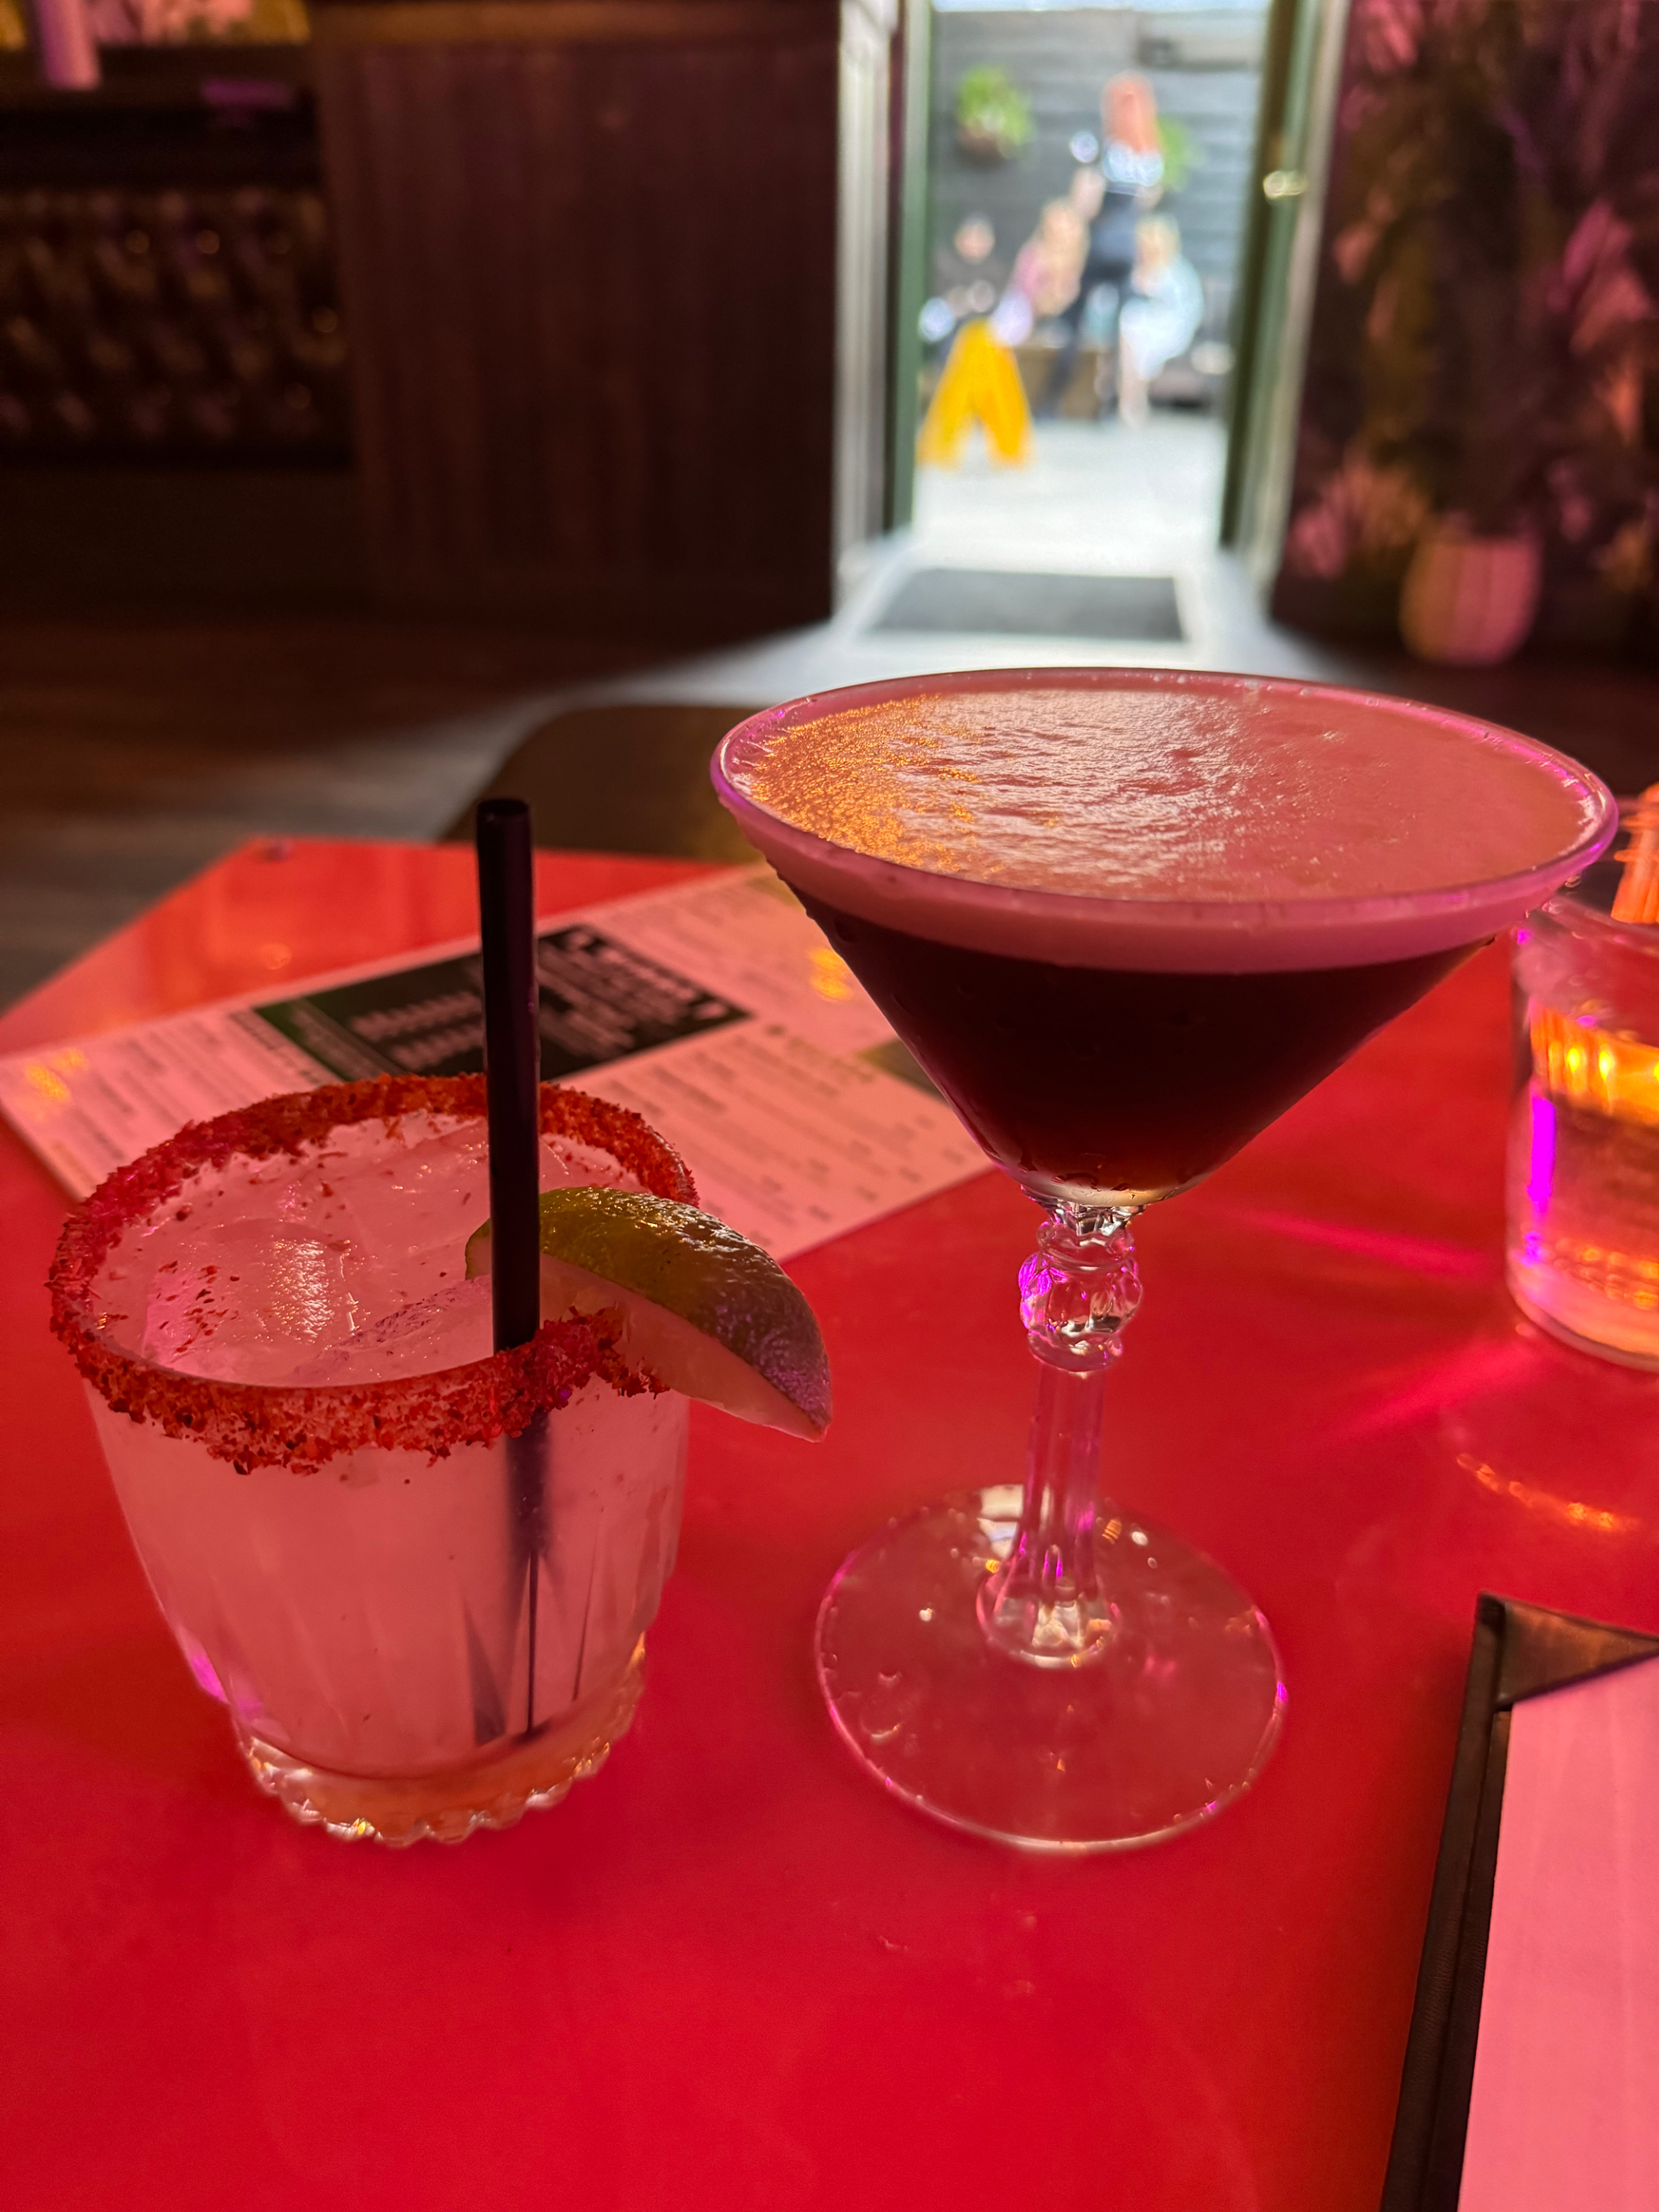 Two cocktails on a red table, one with a salted rim and lime wedge, the other a dark martini